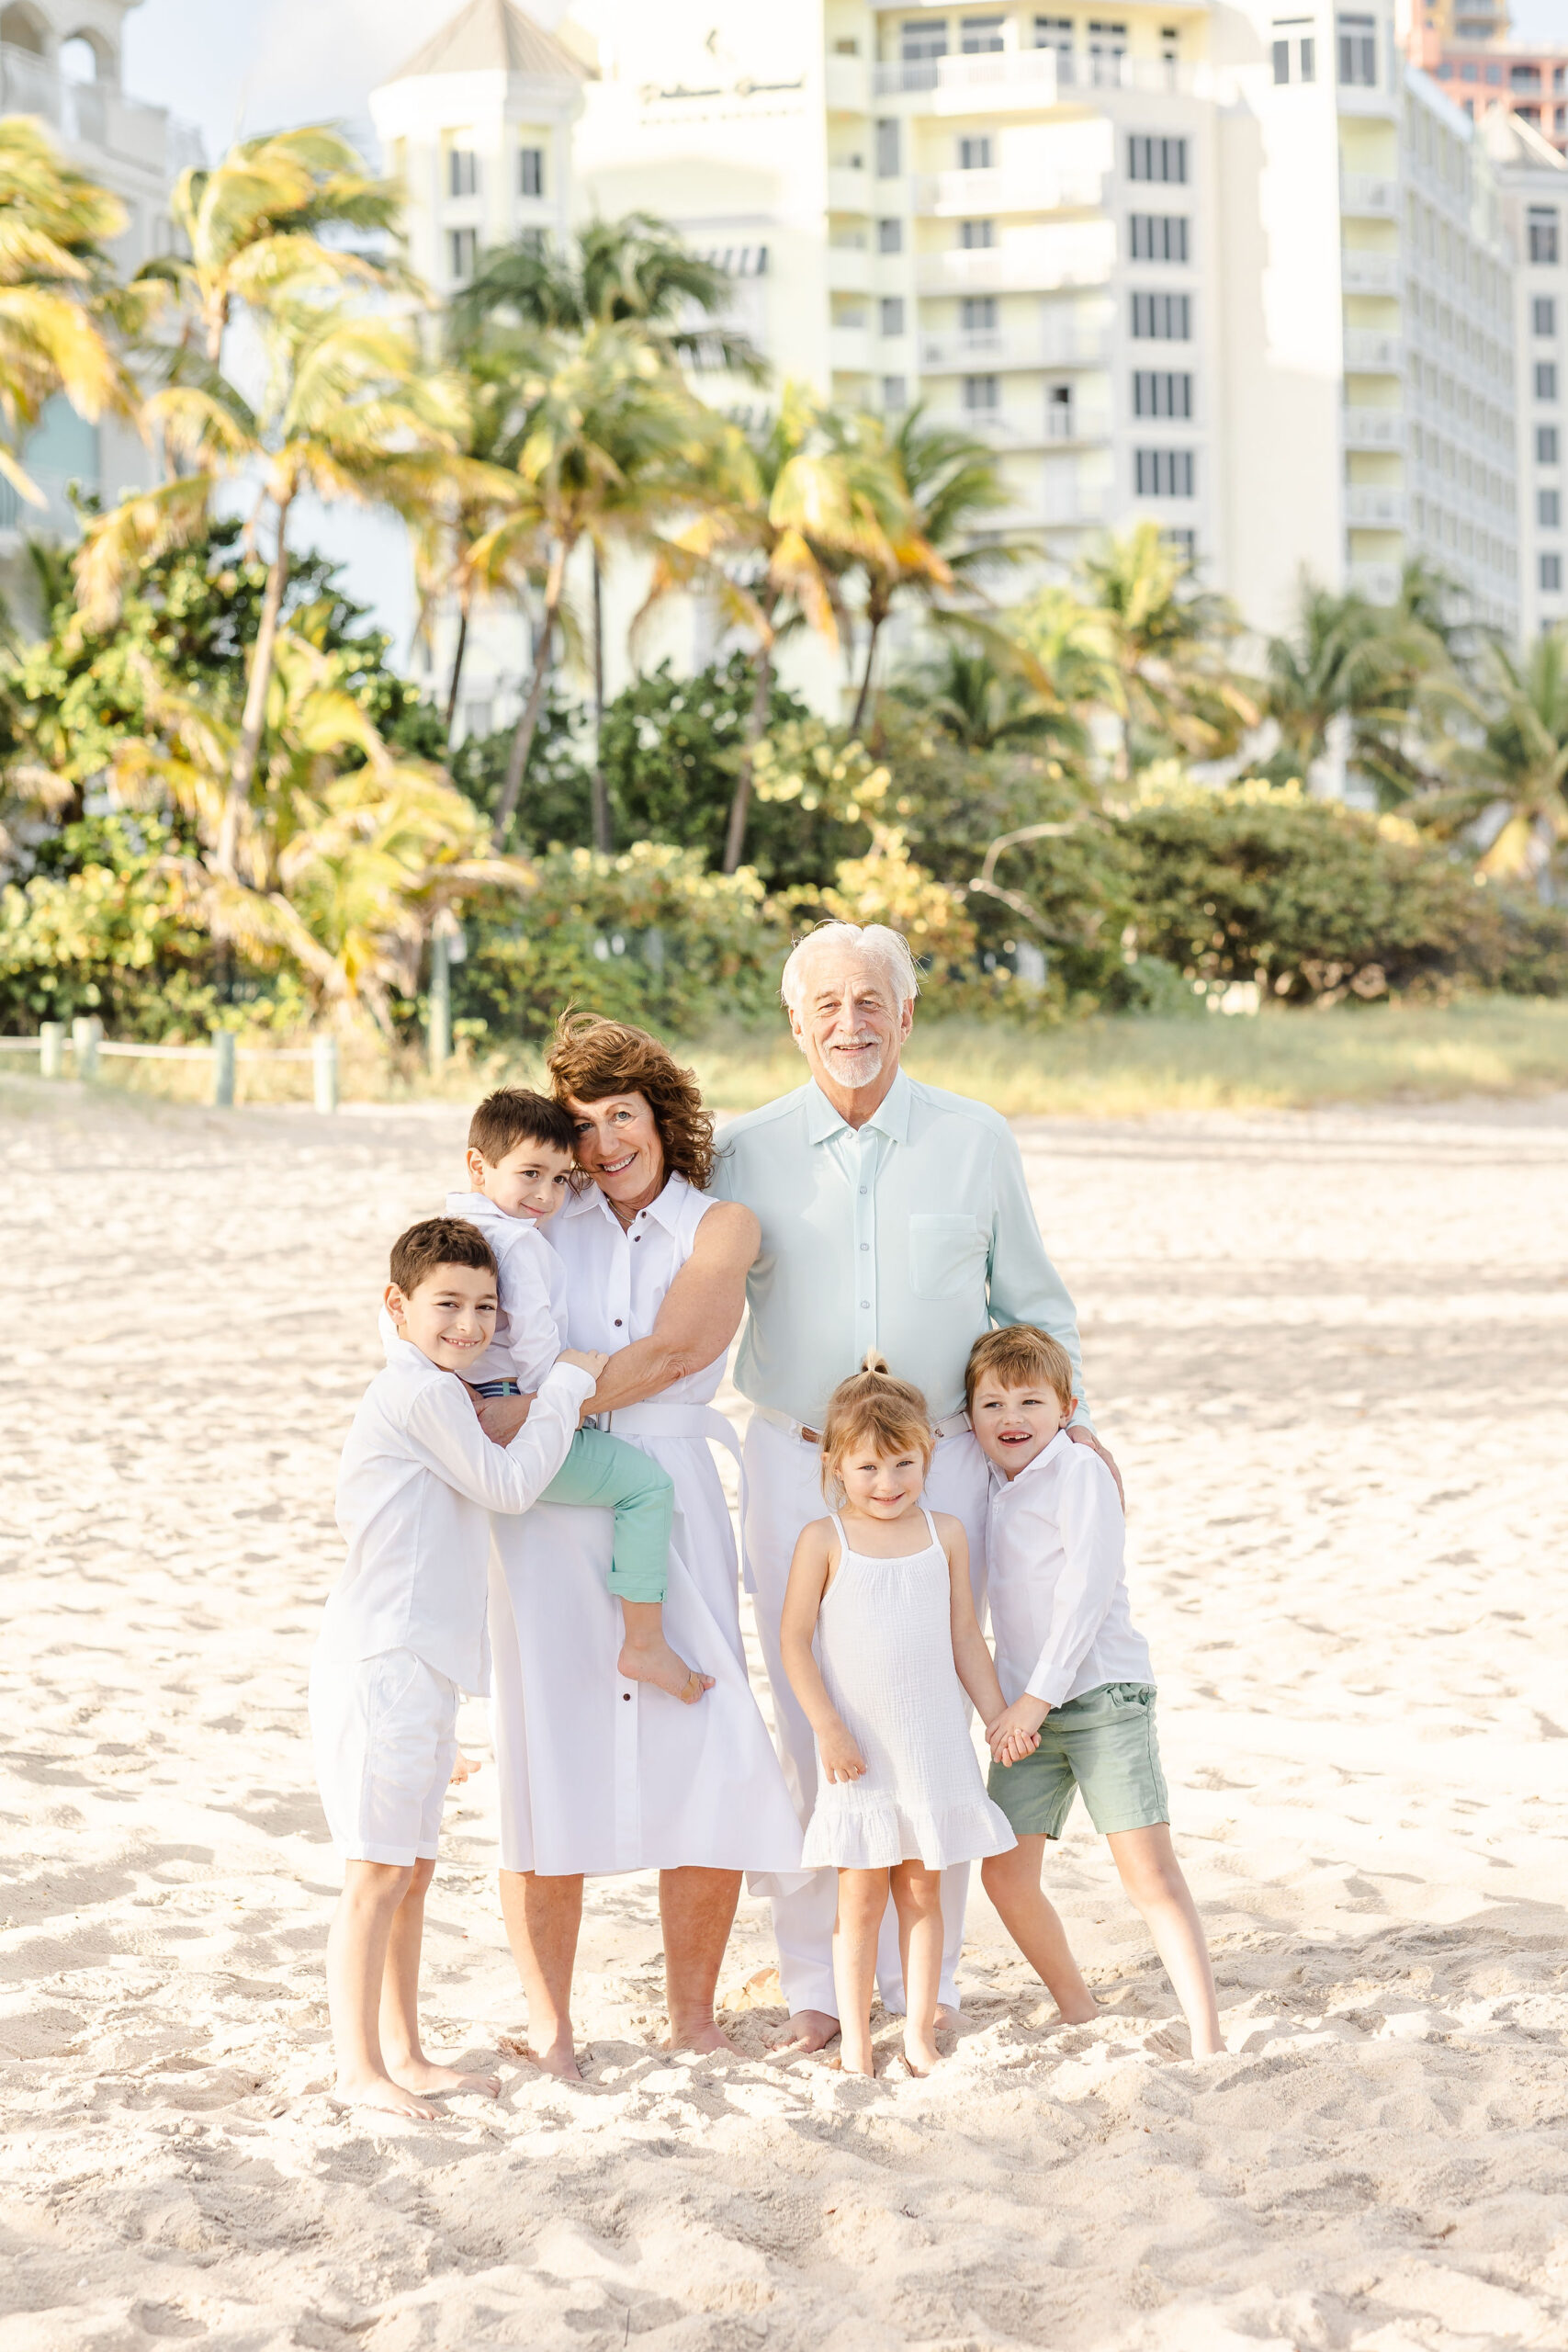 Grandma and grandpa stand on the beach with their four grandchildren